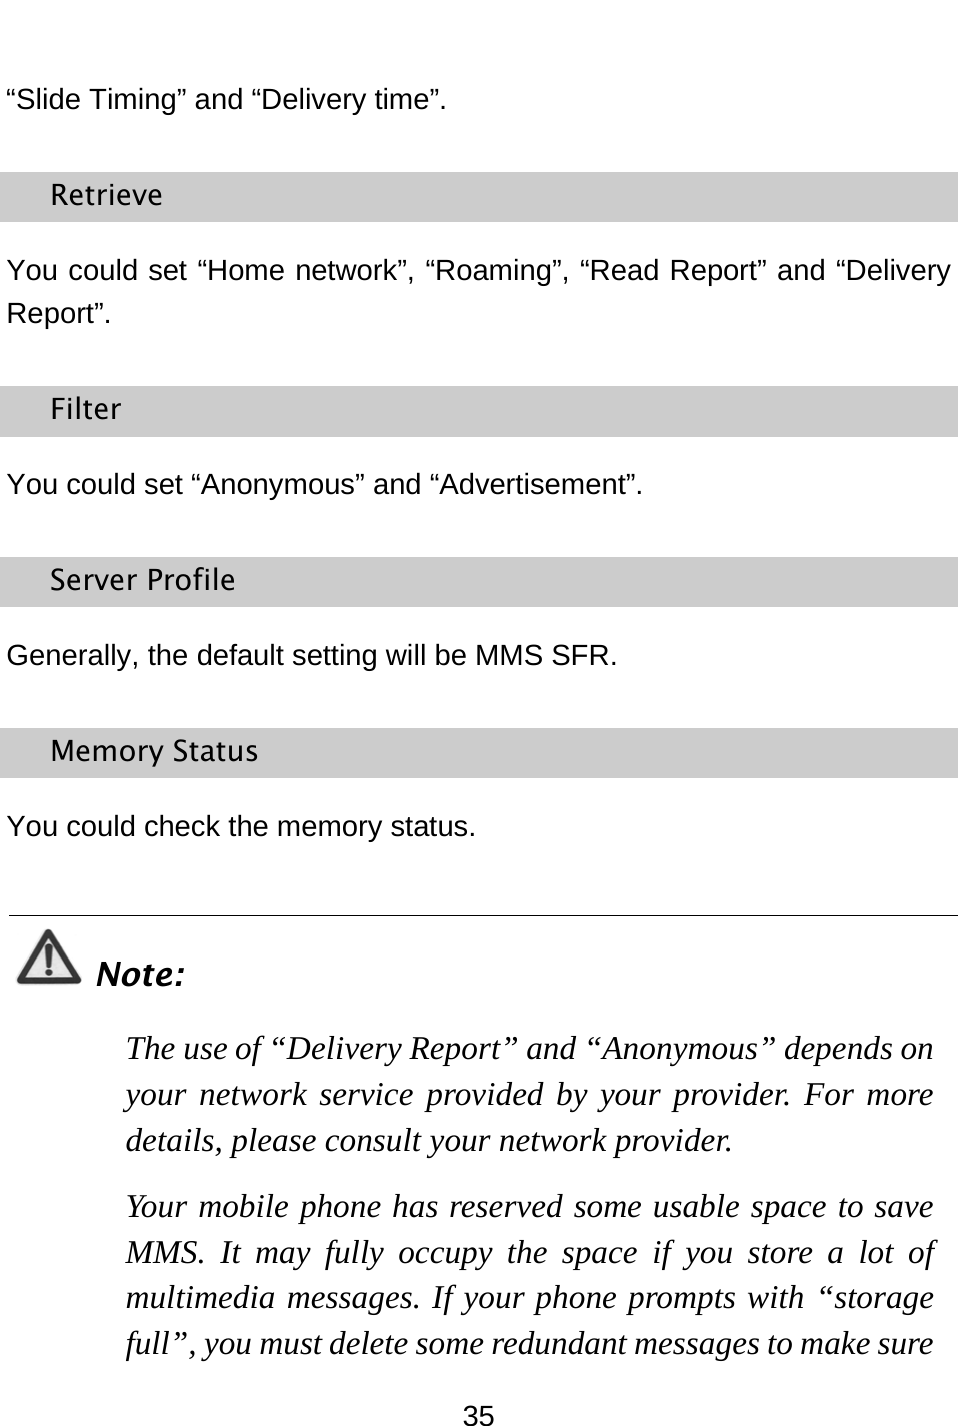  35 “Slide Timing” and “Delivery time”. Retrieve You could set “Home network”, “Roaming”, “Read Report” and “Delivery Report”. Filter You could set “Anonymous” and “Advertisement”. Server Profile Generally, the default setting will be MMS SFR. Memory Status You could check the memory status.  Note: The use of “Delivery Report” and “Anonymous” depends on your network service provided by your provider. For more details, please consult your network provider. Your mobile phone has reserved some usable space to save MMS. It may fully occupy the space if you store a lot of multimedia messages. If your phone prompts with “storage full”, you must delete some redundant messages to make sure 